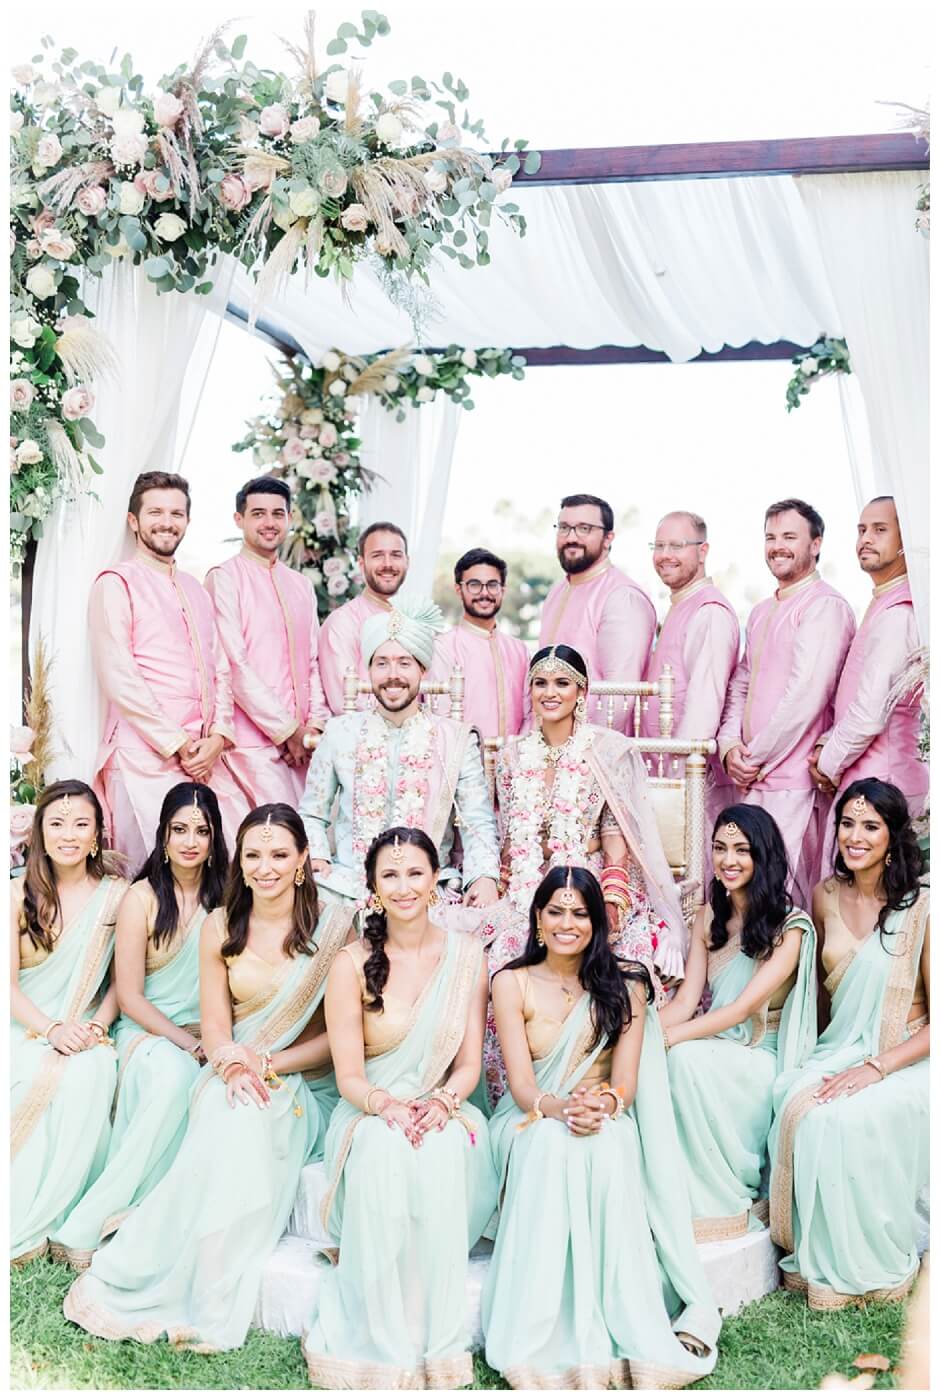 Luxury Indian Wedding Photography San Diego- indoor reception dancing and table details